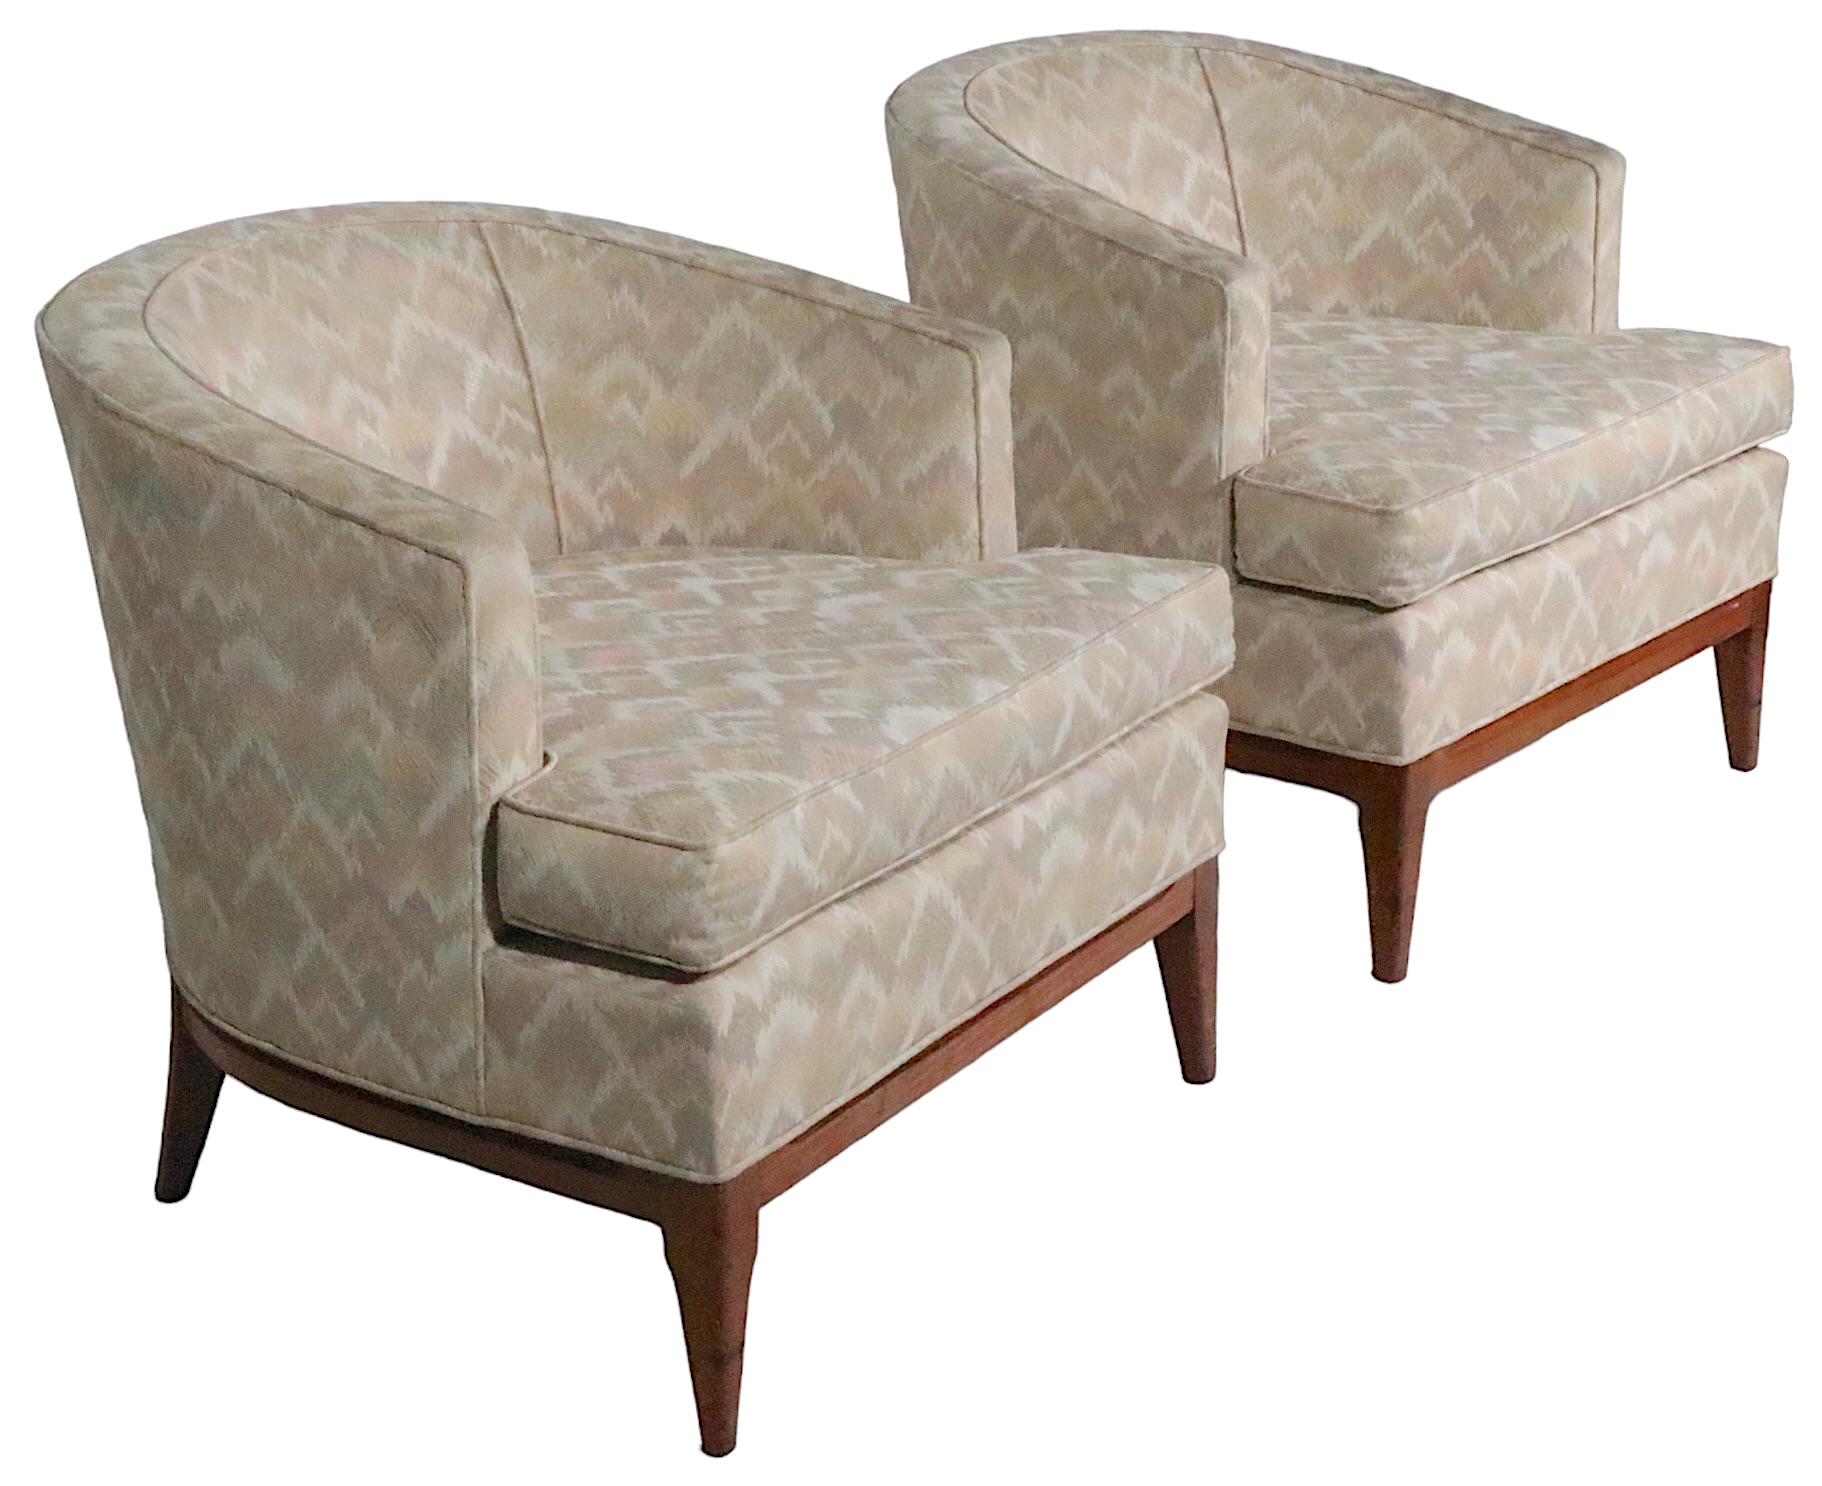 Chic pair of midcentury, Hollywood Regency style tub, lounge chairs, in the style of Robsjohn Gibbings. Both chairs are in very good, original, clean and ready to use condition, showing only light cosmetic wear, normal and consistent with age. 
